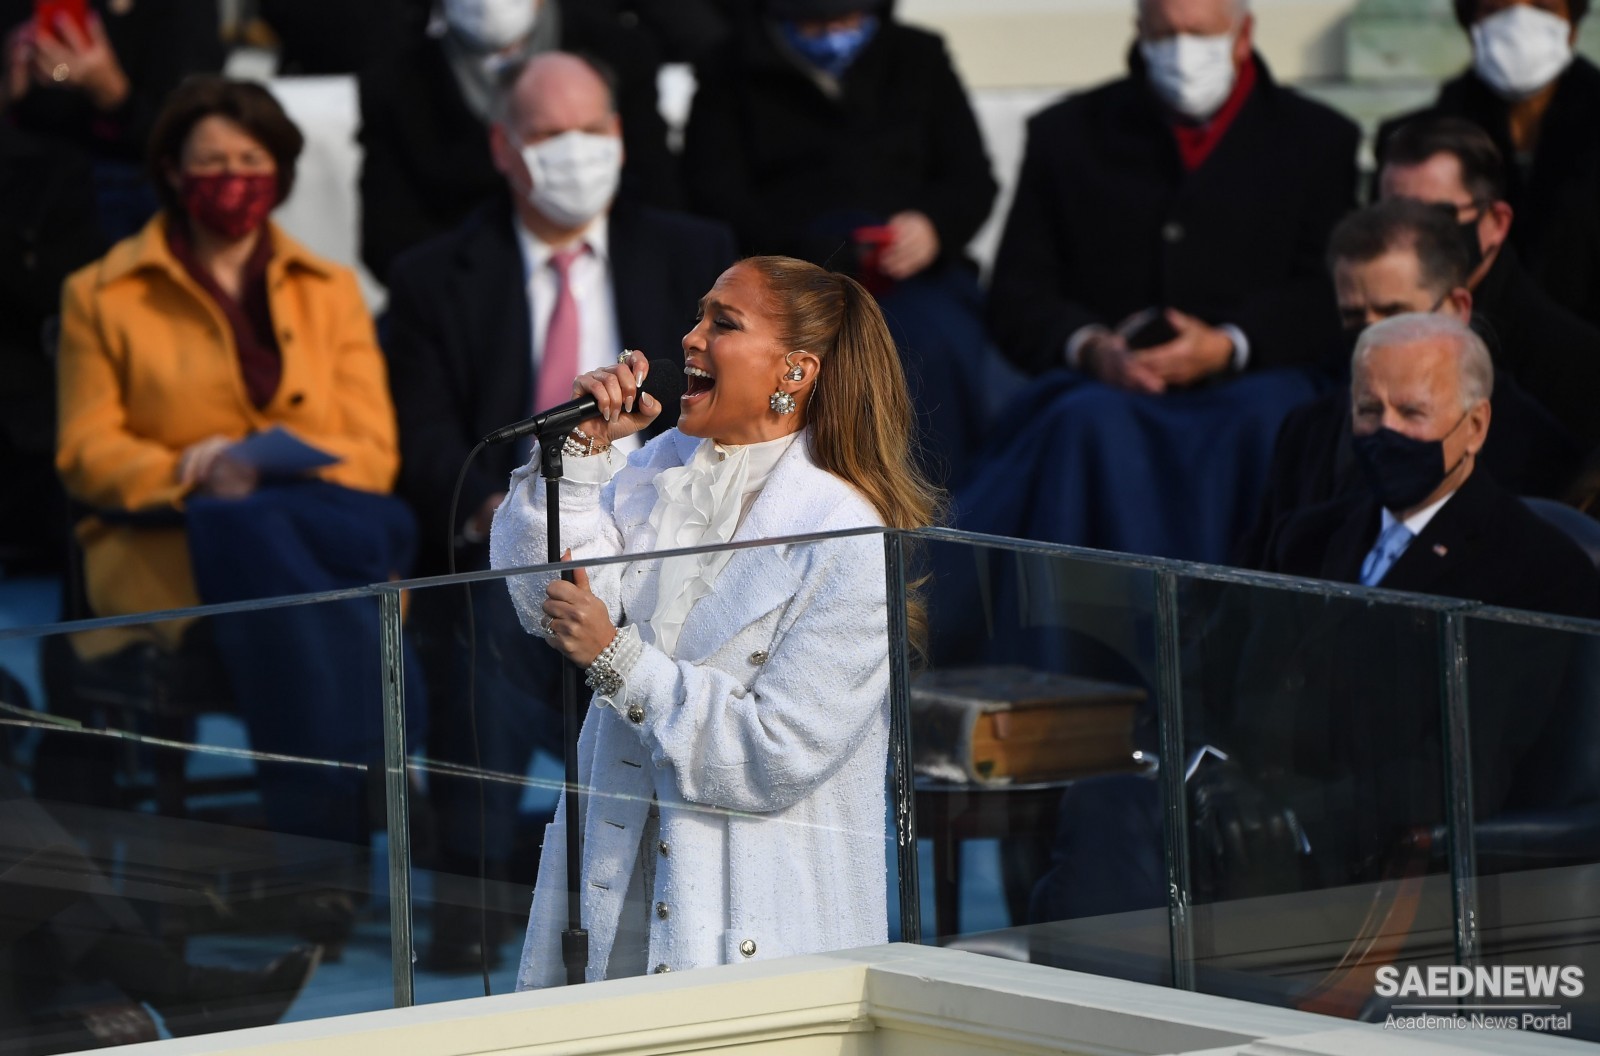 Jennifer Lopez Performs "This Land Is Your Land" in Biden Inauguration Ceremony